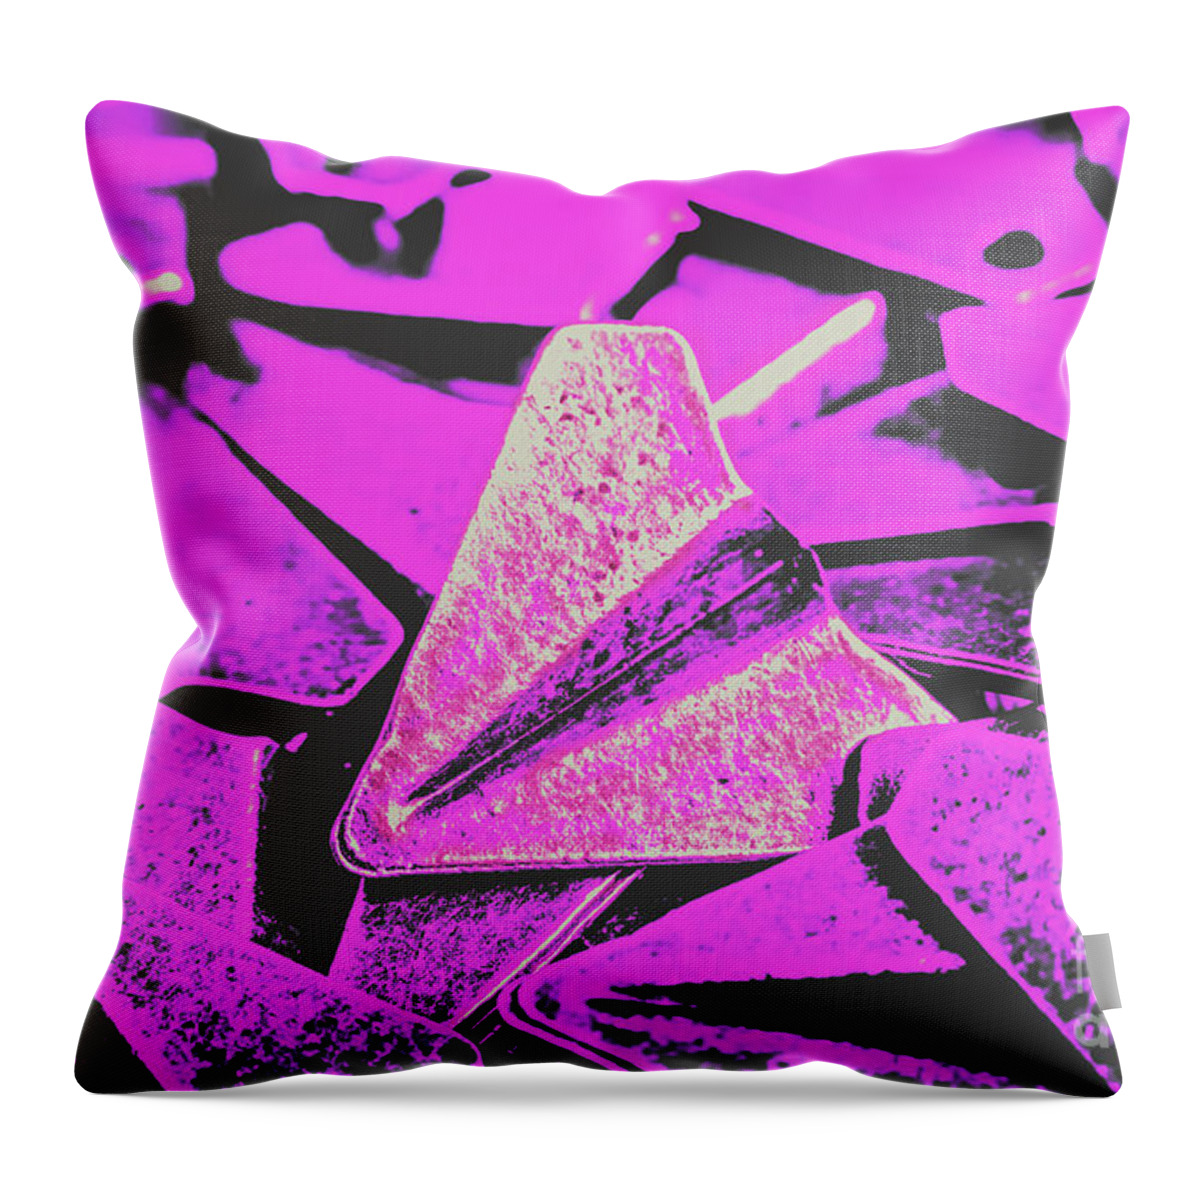 Transport Throw Pillow featuring the photograph Metal wings by Jorgo Photography